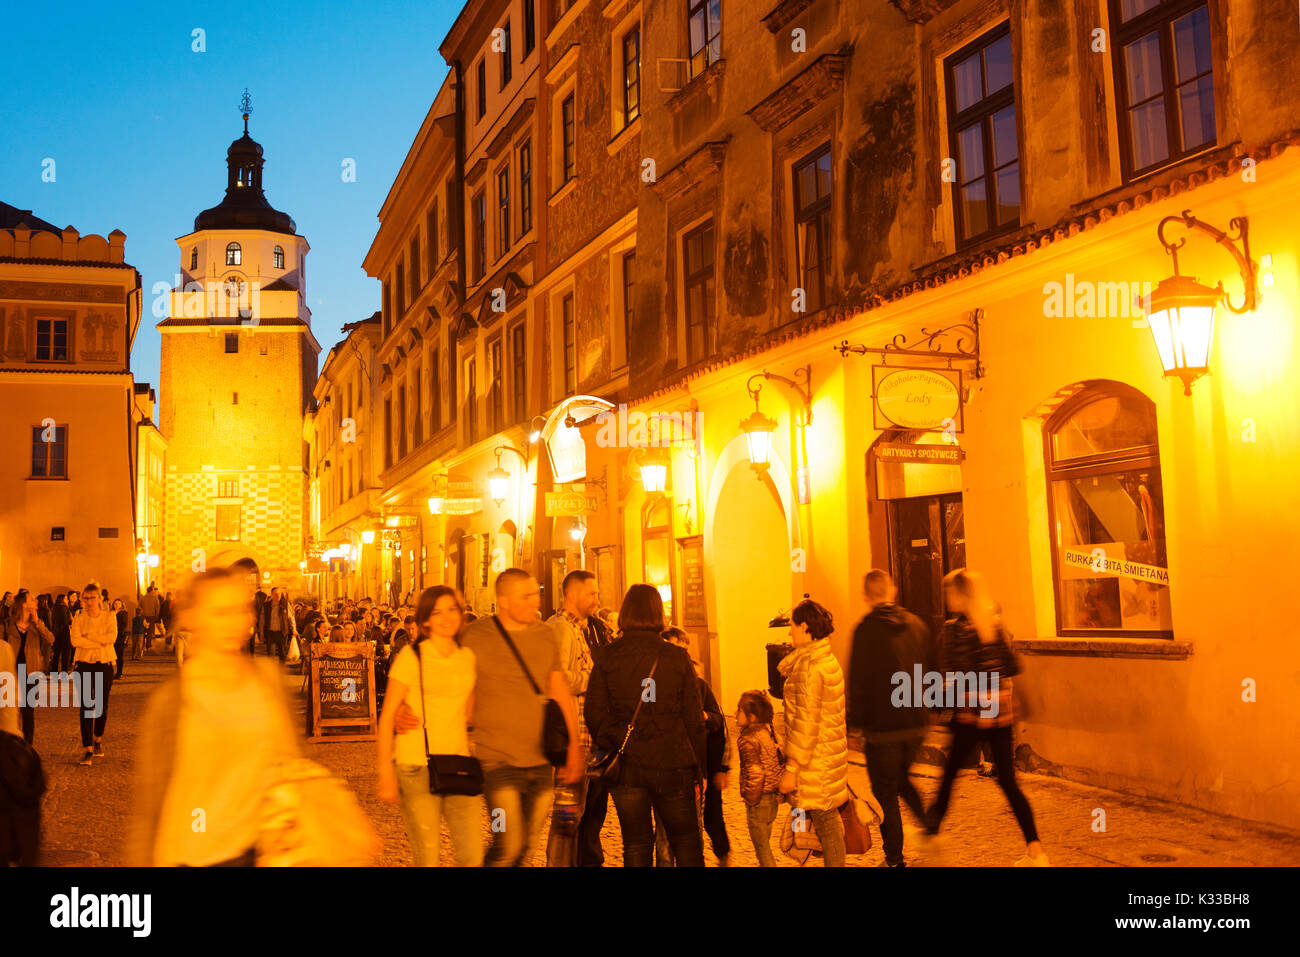 Locals, visitors and holiday makers walk in the evening in Lublin's old town.  The Krakow Gate is in the background. Stock Photo